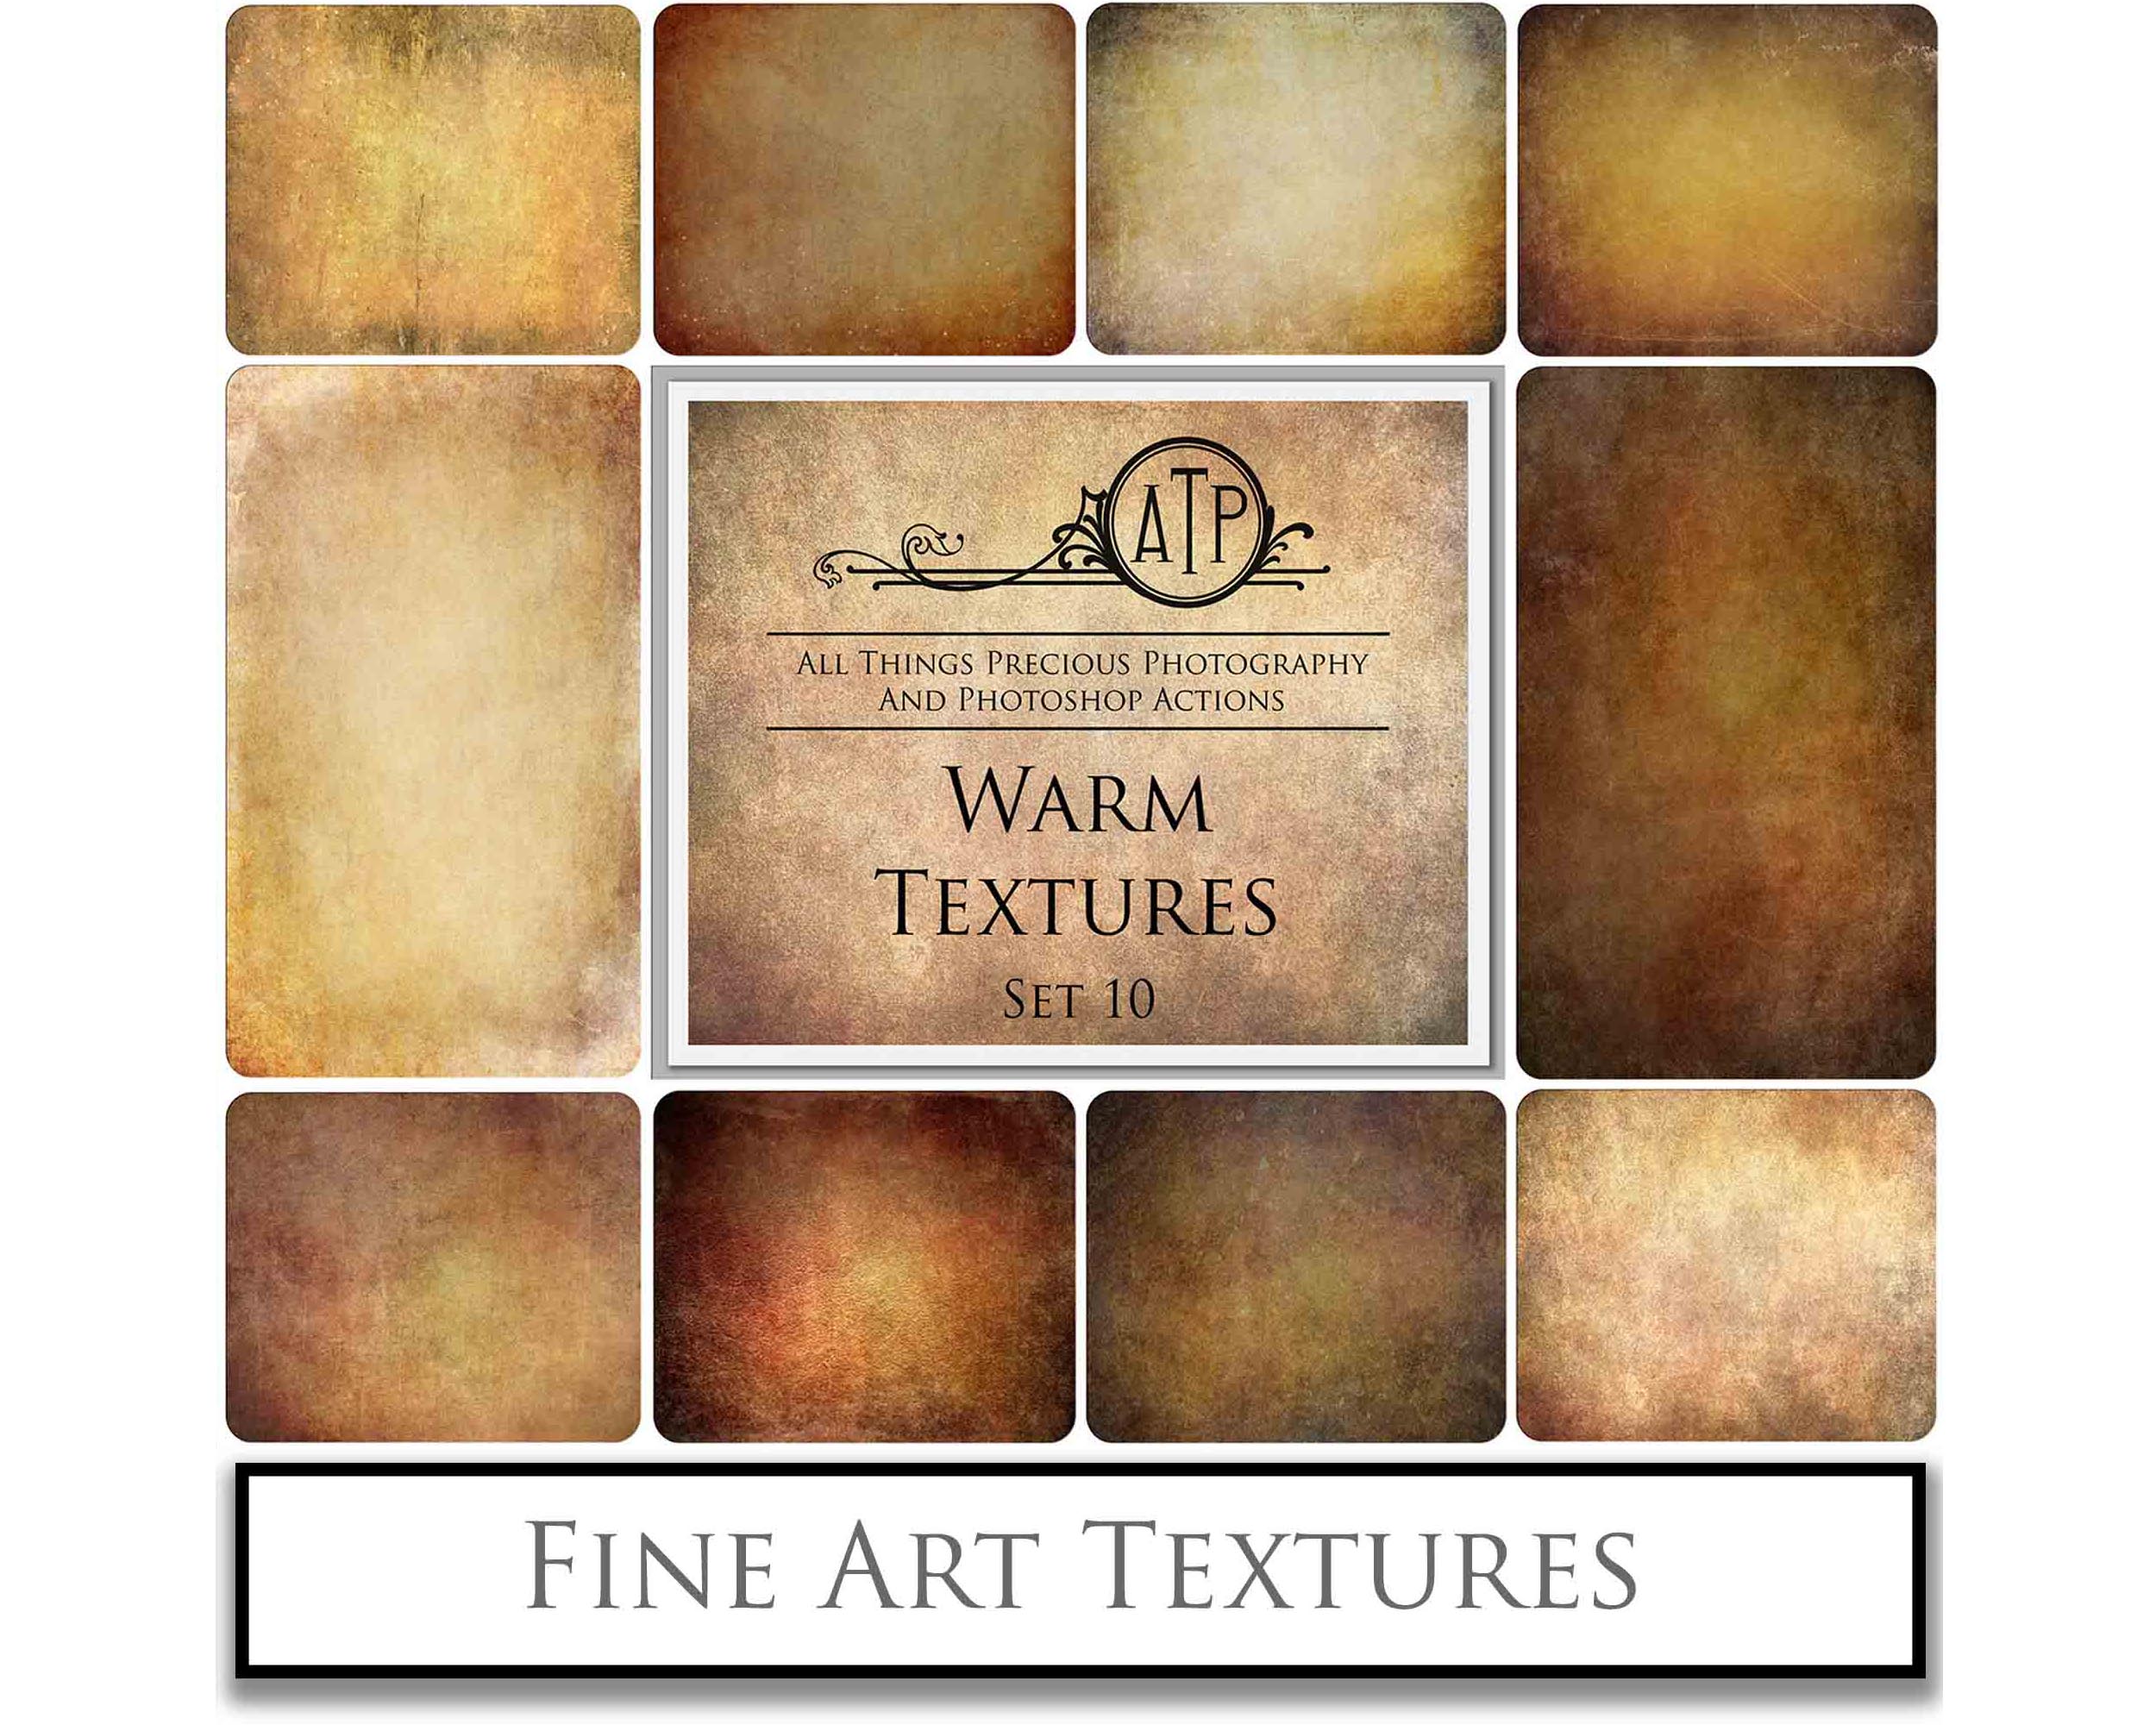 Warm Tinted Textures. Fine art texture for photographers, digital editing. Photo Overlays. Antique, Old World, Grunge, Light, Bundle. Textured printable Canvas, Colour, black and white, Bundle. High resolution, 300dpi Graphic Assets for photography, digital scrapbooking and design. By ATP Textures